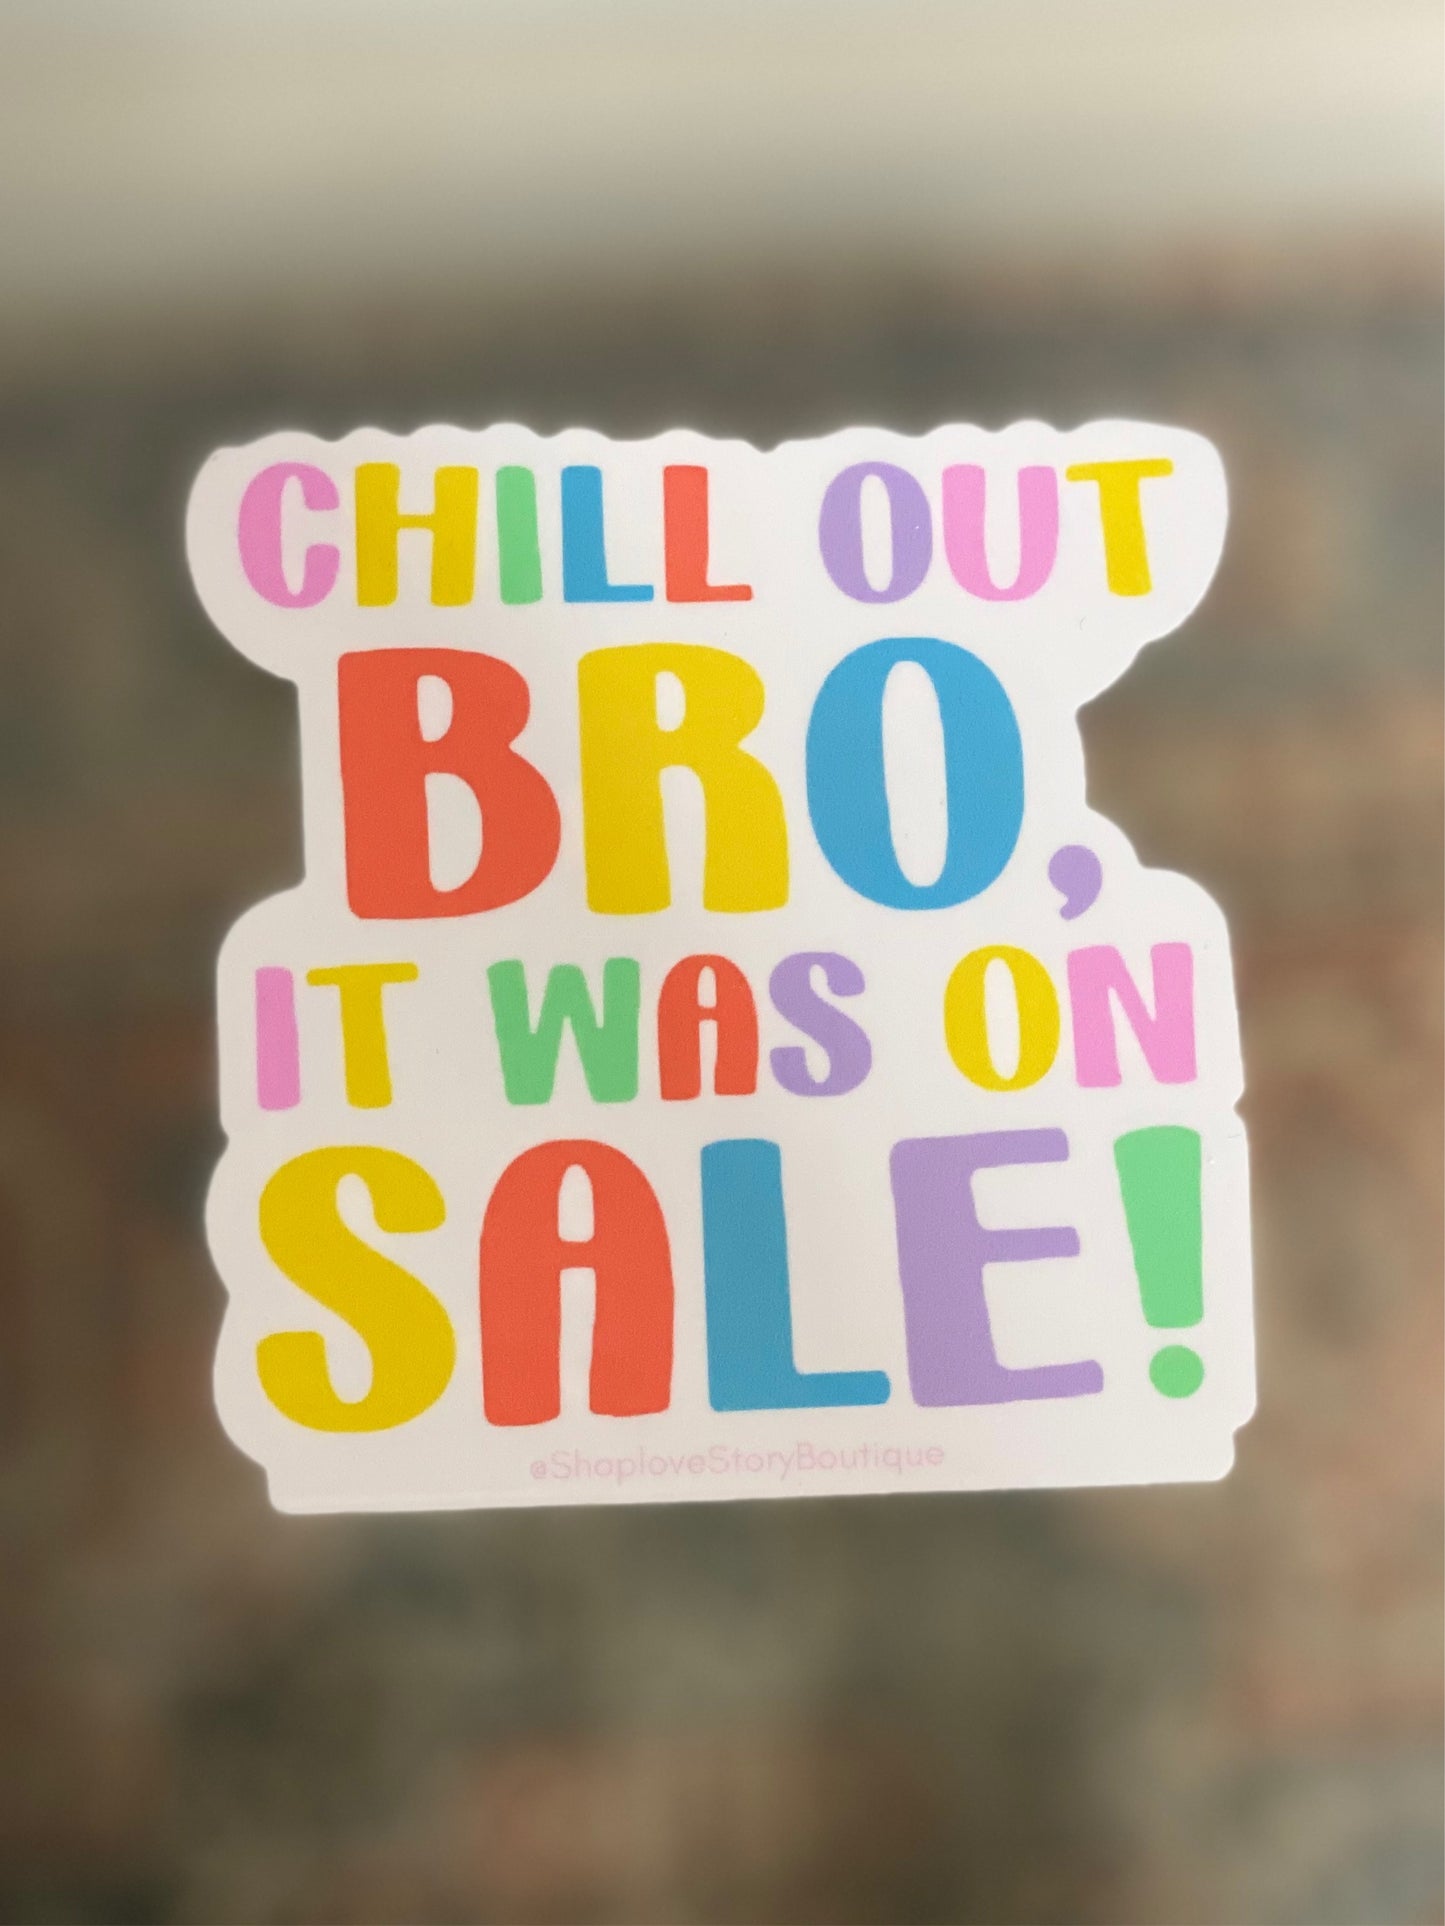 Chill out Bro, it was on sale! sticker